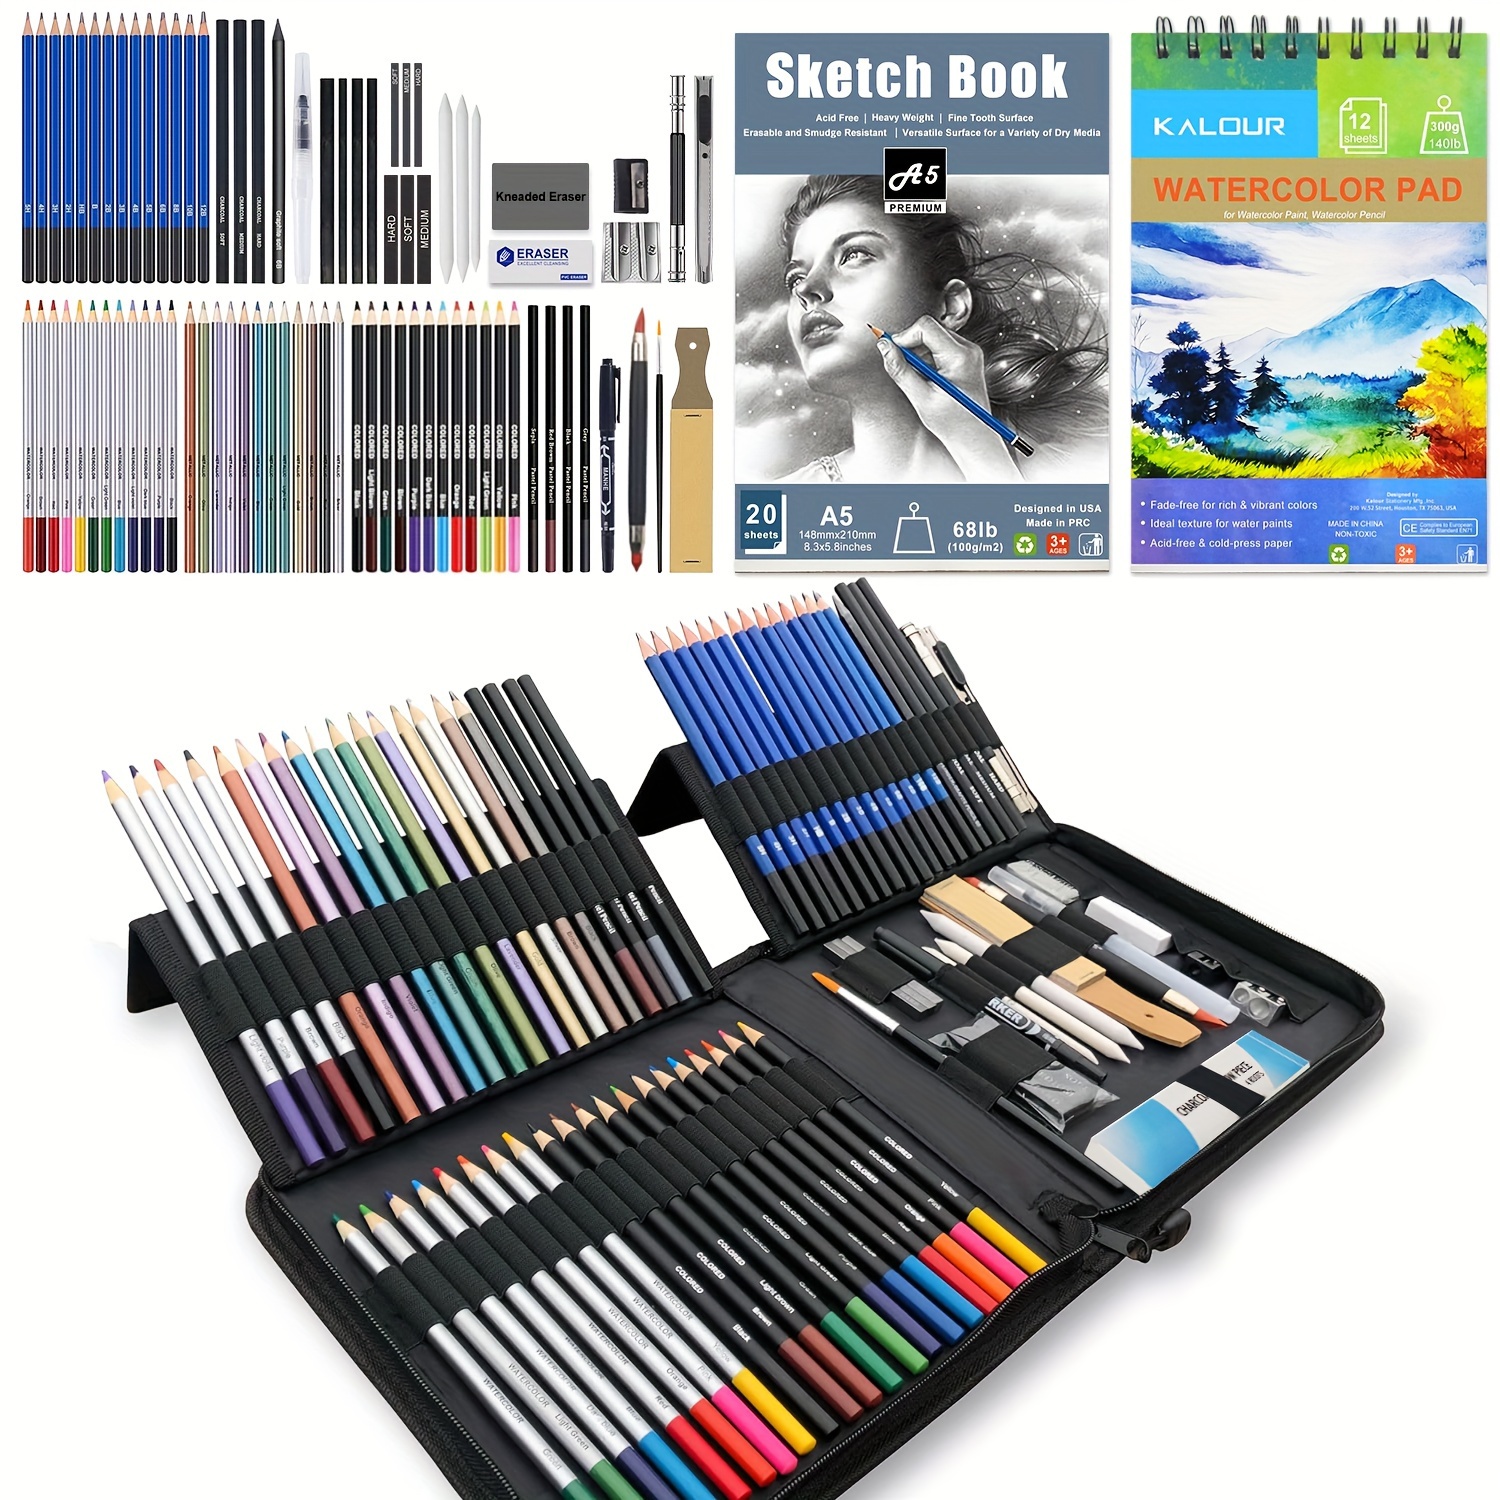  HTVRONT 76 PACK Drawing Set Supplies - Pro Art Set for Adult  with 2-Color Sketchbook,include Colored, Graphite, Charcoal, Watercolor &  Metallic Pencil, for Adults Artists Teens Beginner : Arts, Crafts